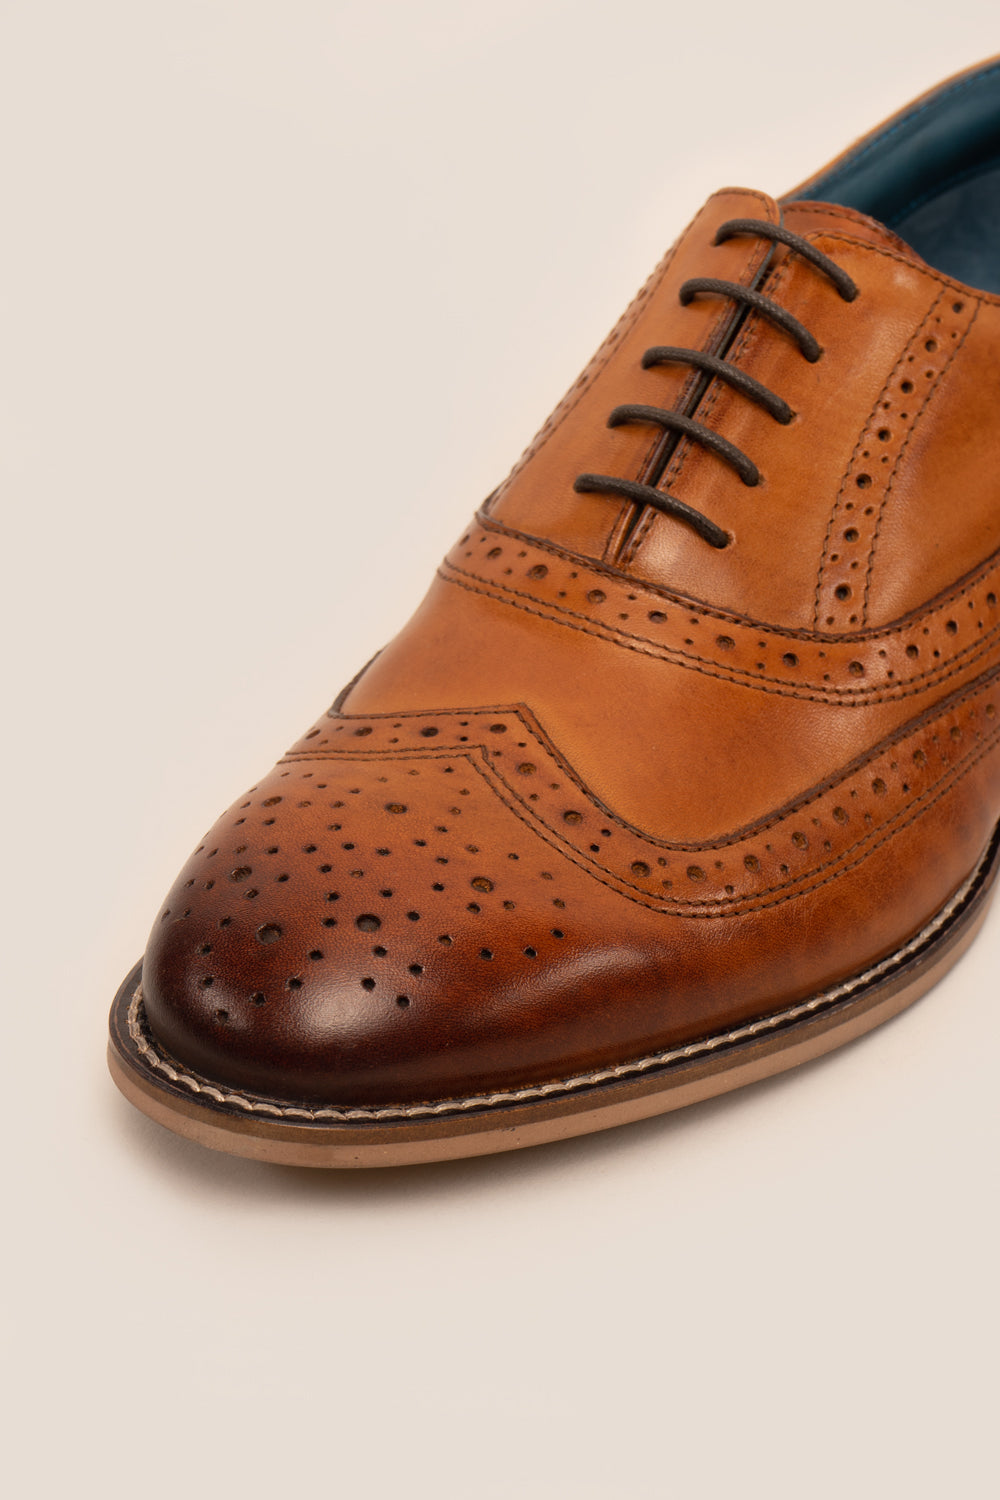 Winston tan brogue wingtip oxford shoes for men by oswin hyde